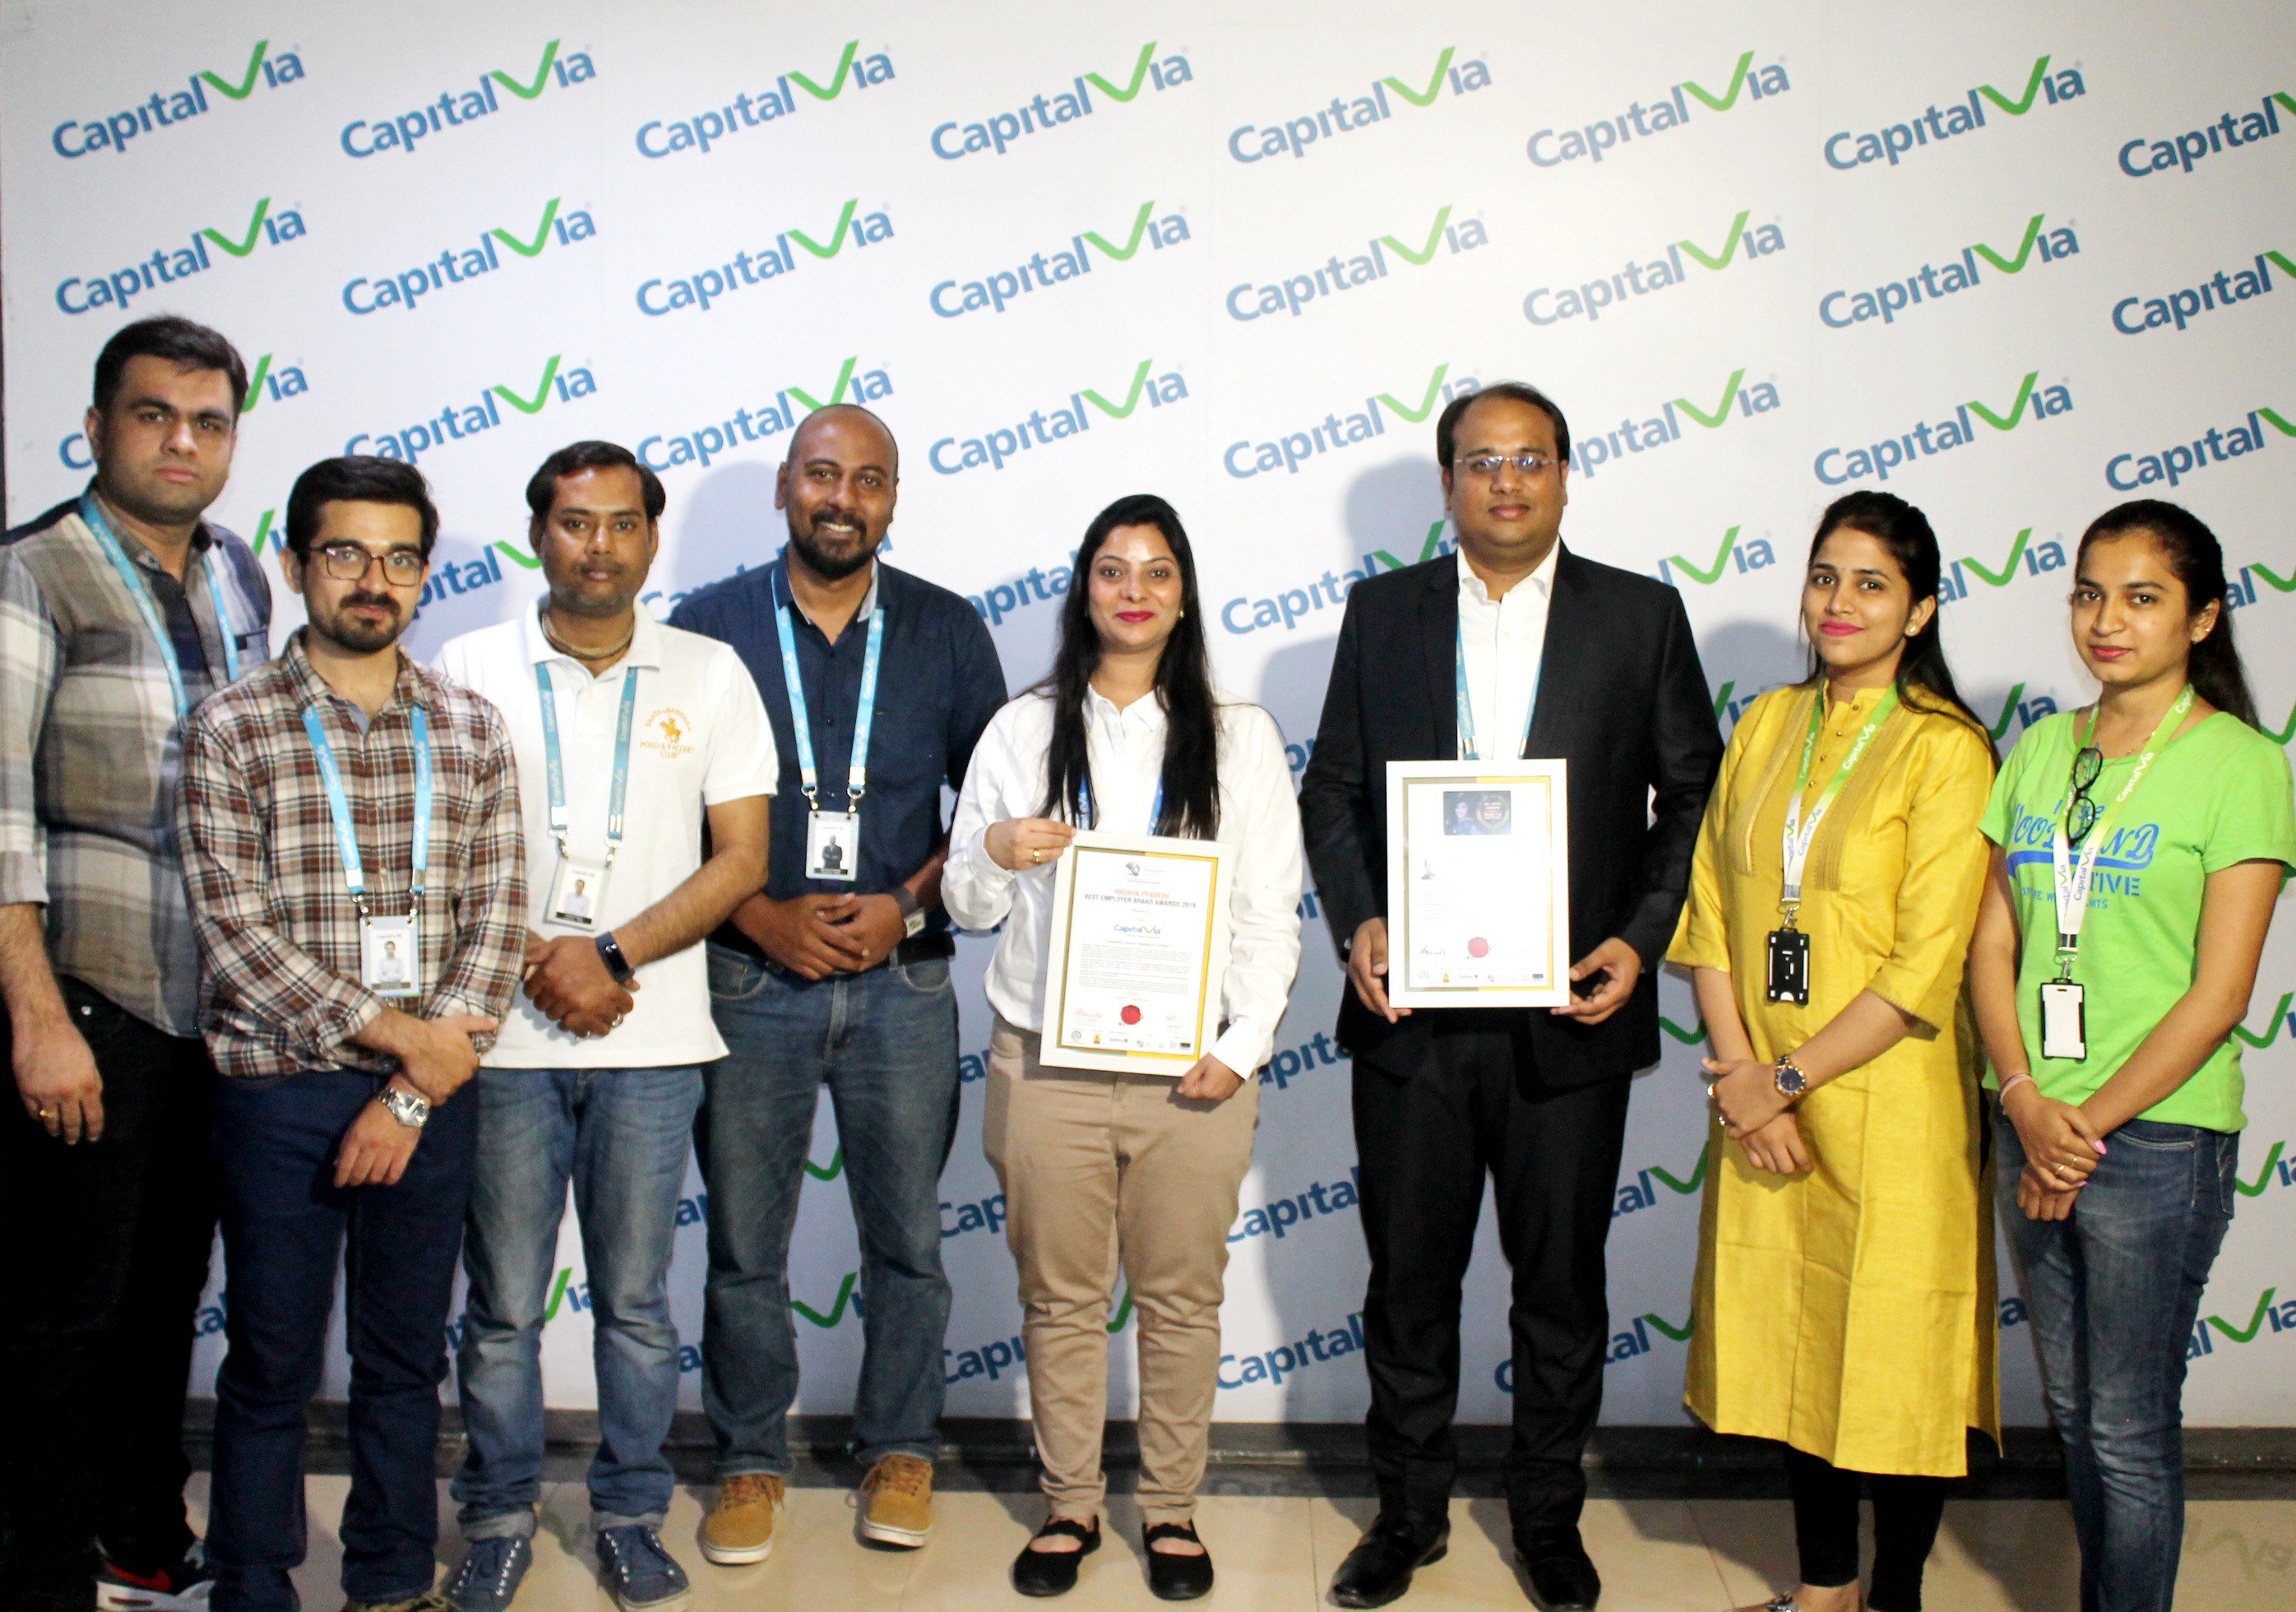 capitalvia auf twitter: „capitalvia is proud to get recognized as the #bestemployer brand in #madhyapradesh. this award is testimony to the fact that we have always treated human capital as our biggest